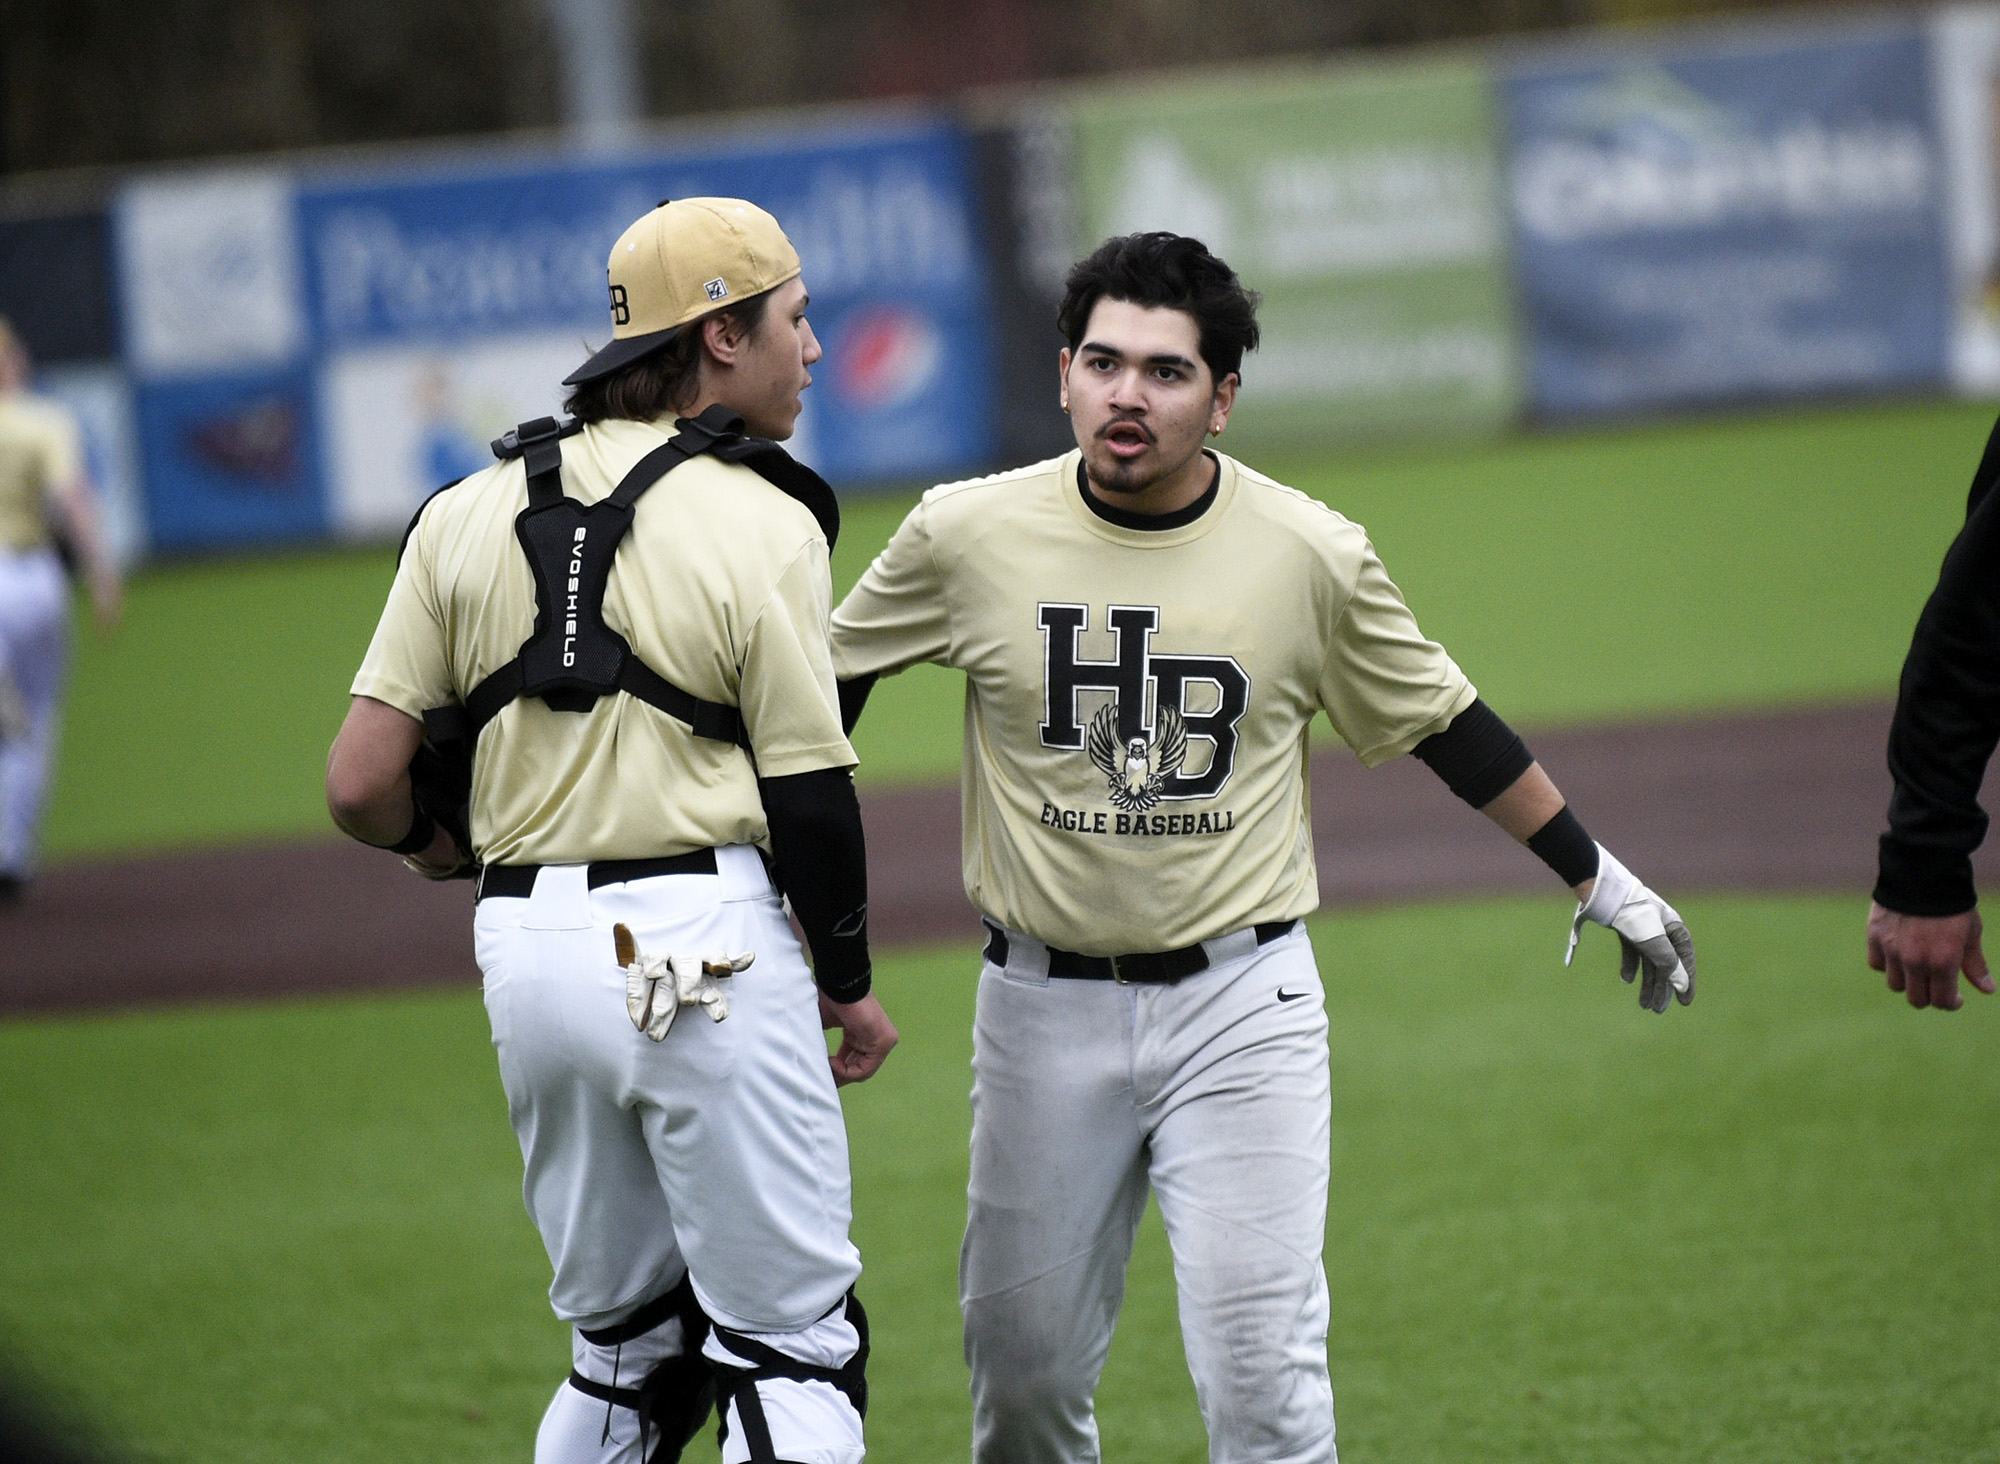 Elias Estrada (right) is congratulated by teammate Jason Soumokil after Estrada singled home the go-ahead run in the seventh inning of Bay’s 3-2 win over Ridgefield on Monday, March 27, 2023.